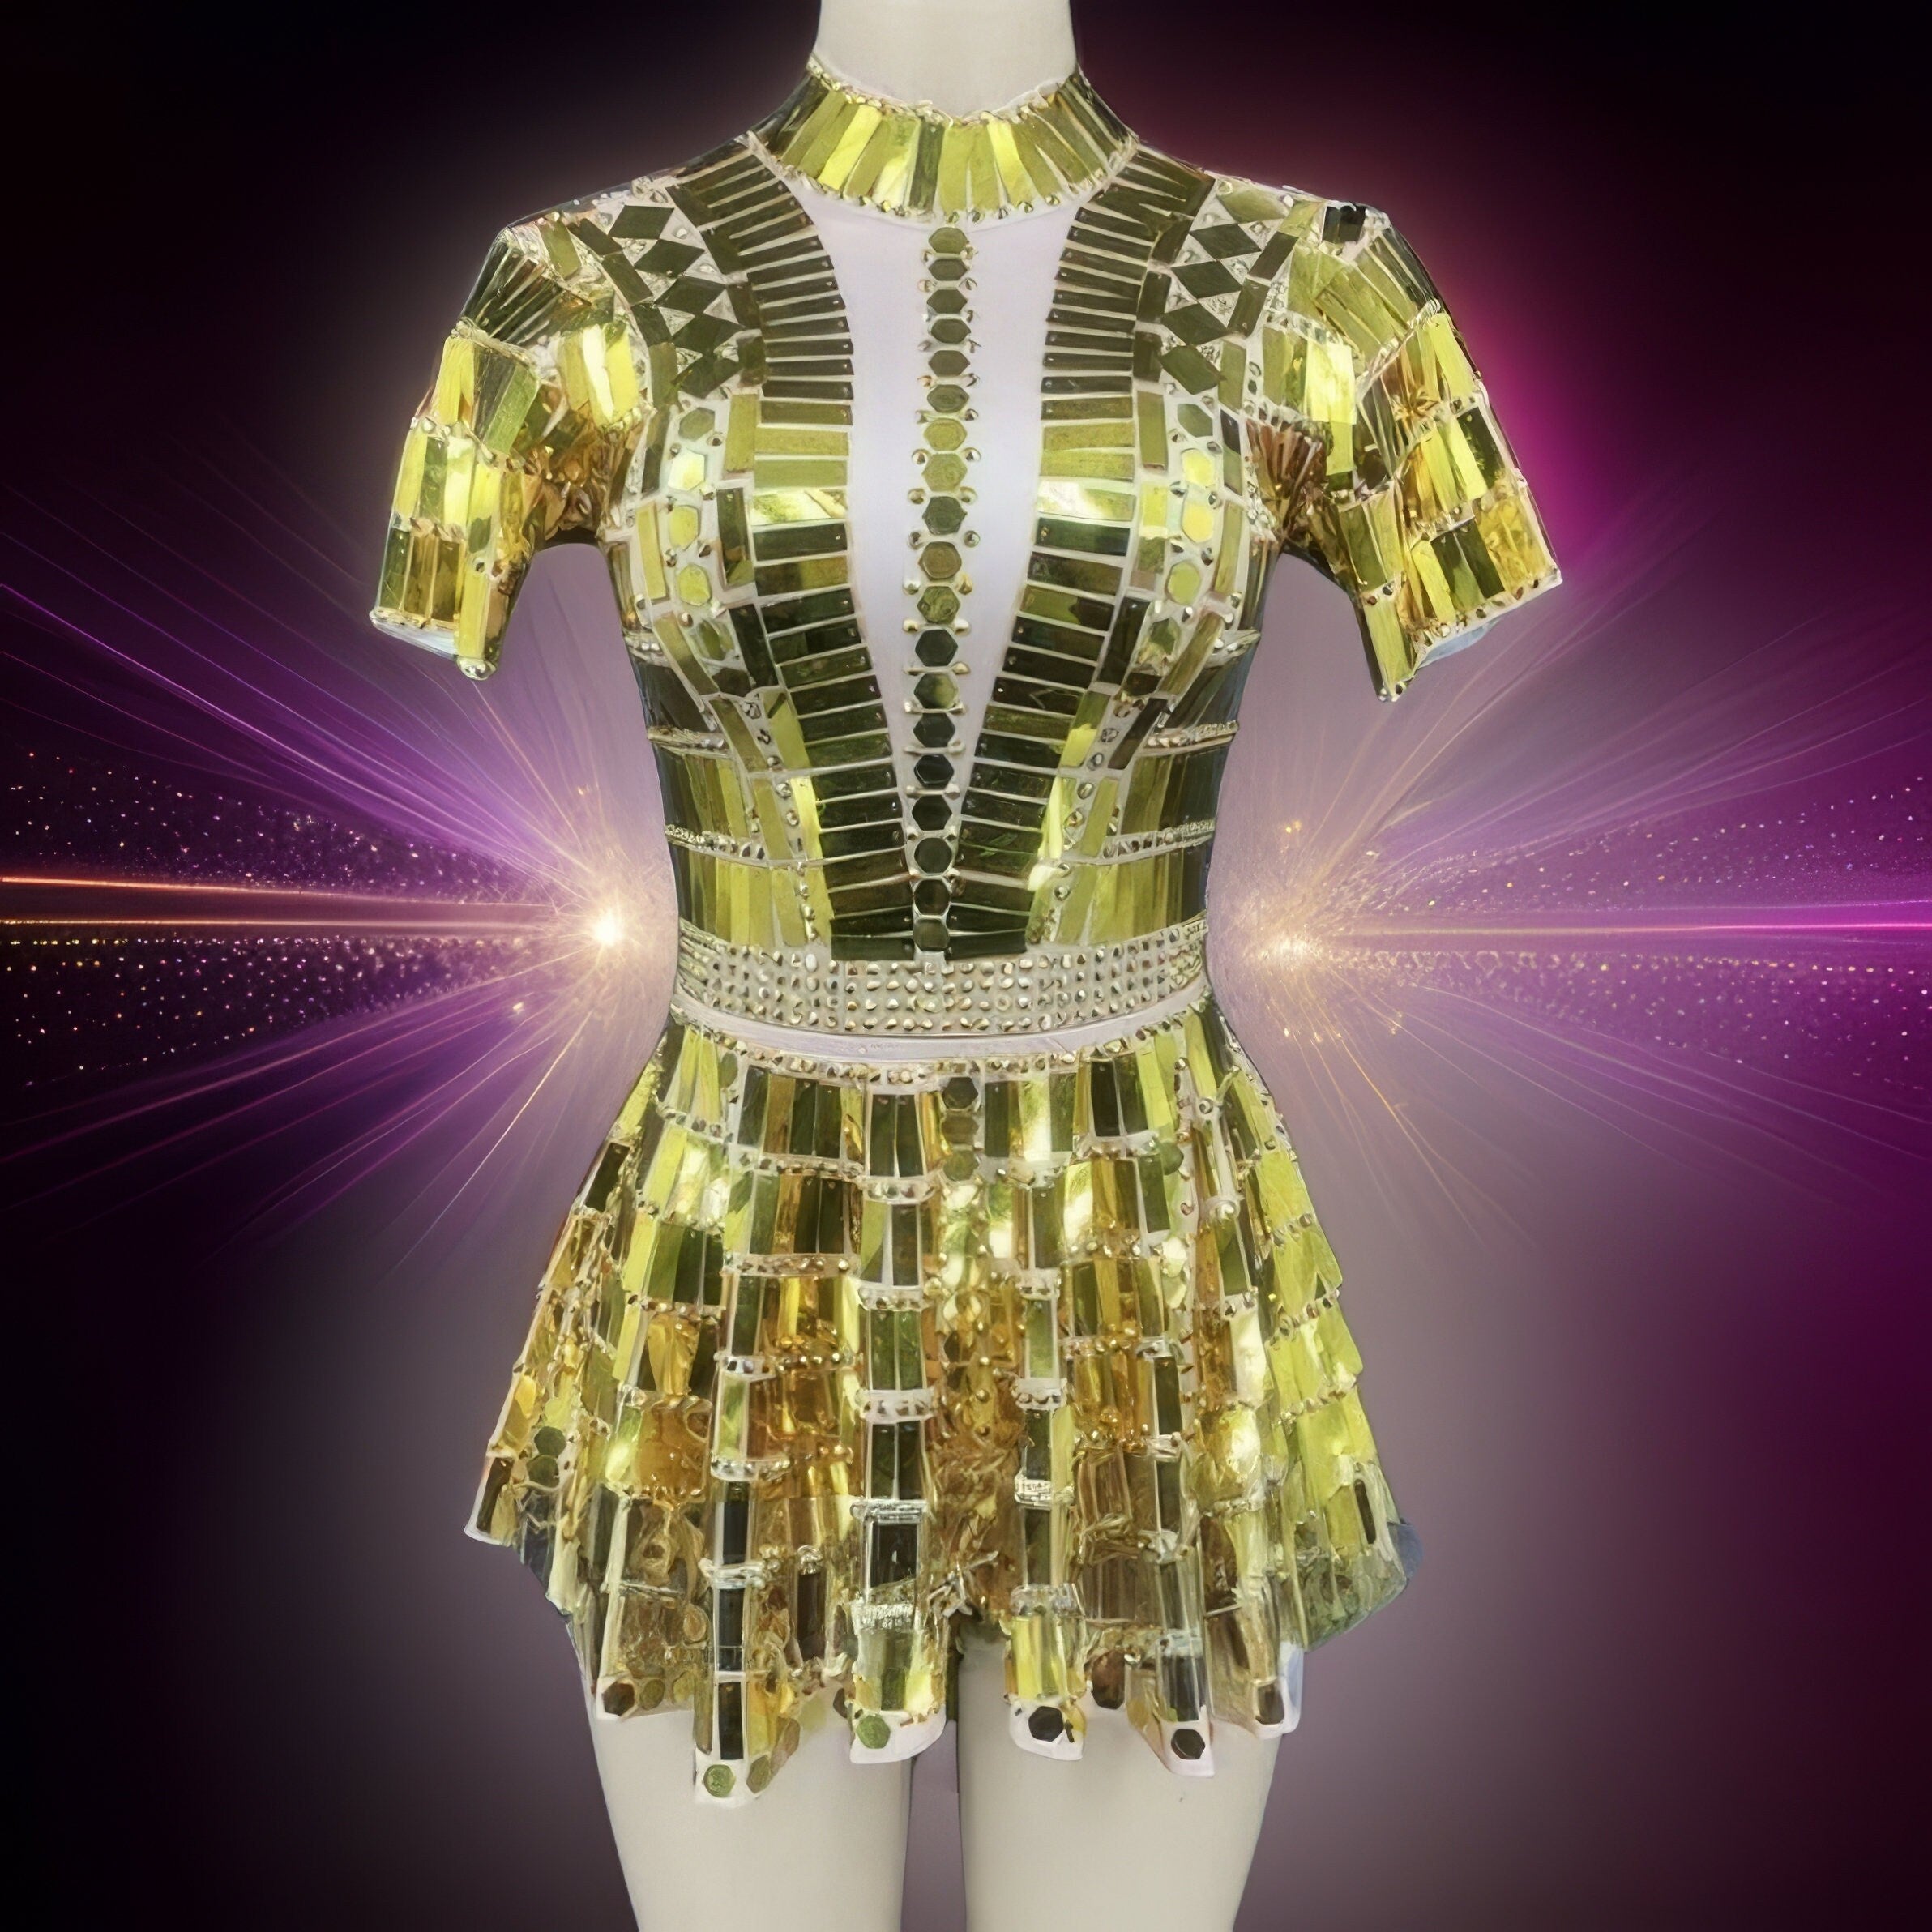 Electra Reflective Sequins Party Dress / Gold leotard and skirt, Futuristic Reflective Festival Outfit, Disco Dance Costume, Mirror Bodysuit